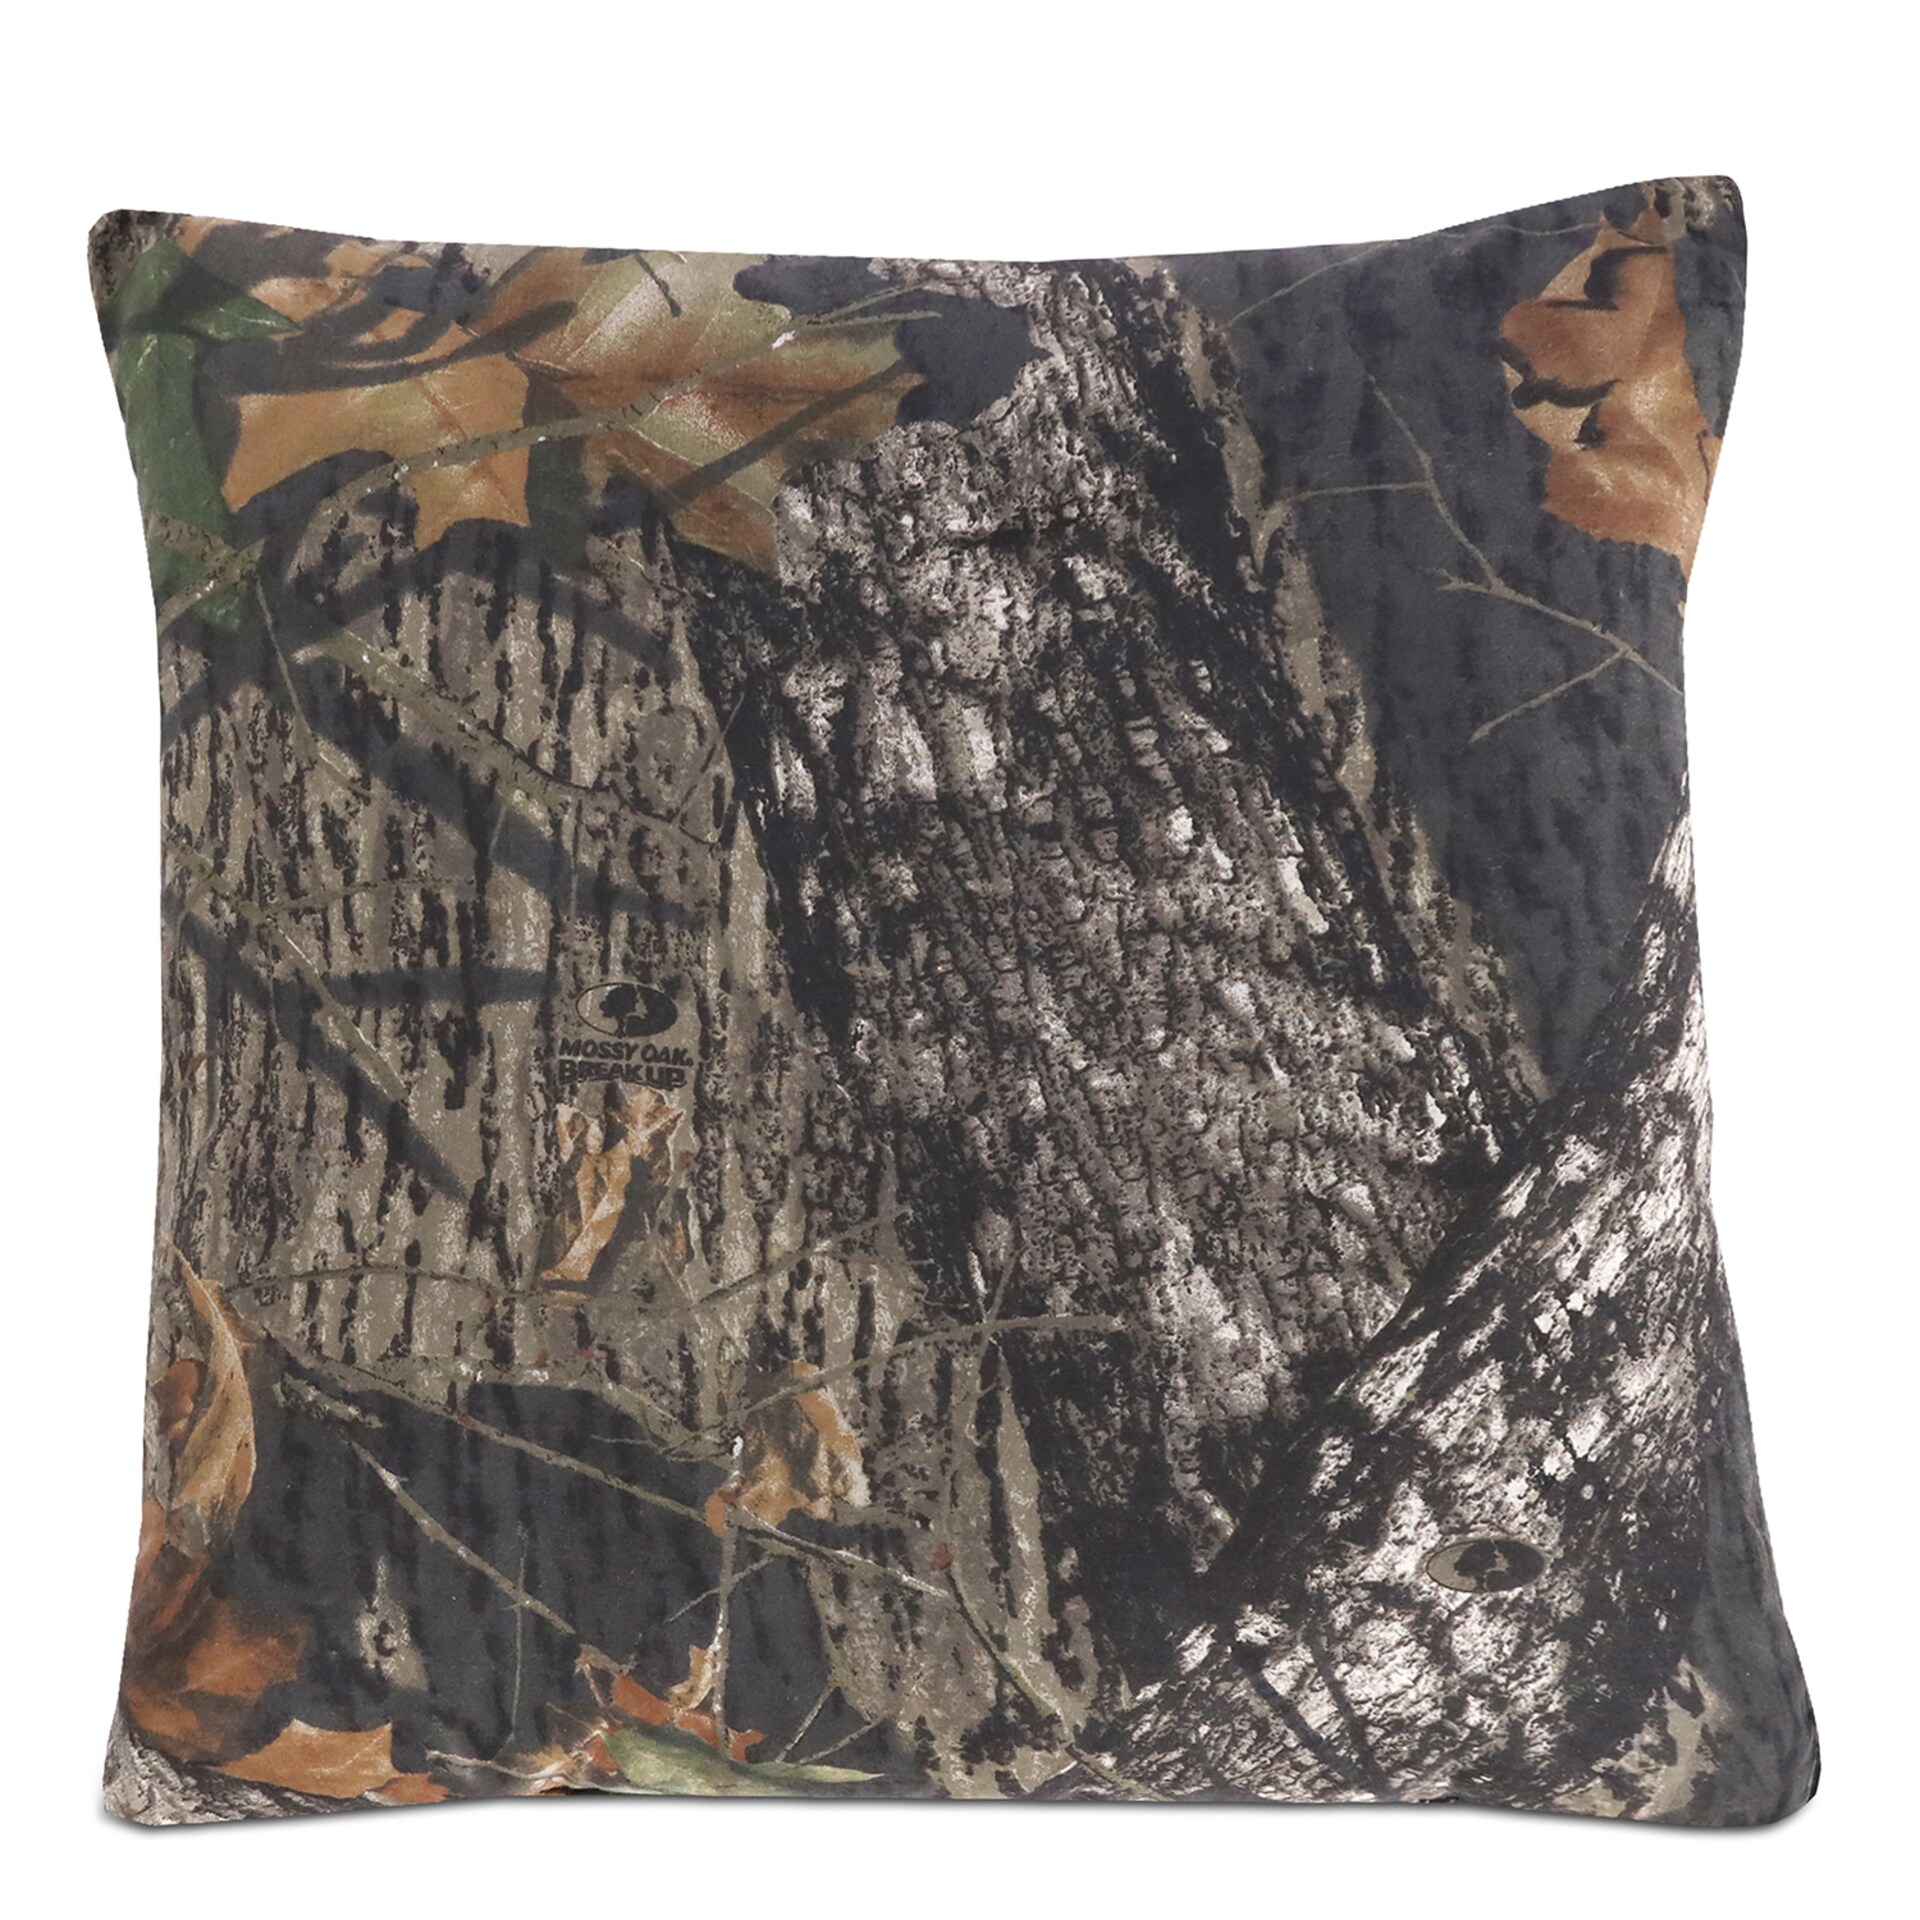 Mossy Oak Specialty Medium Synthetic Bed Pillow at Lowes.com